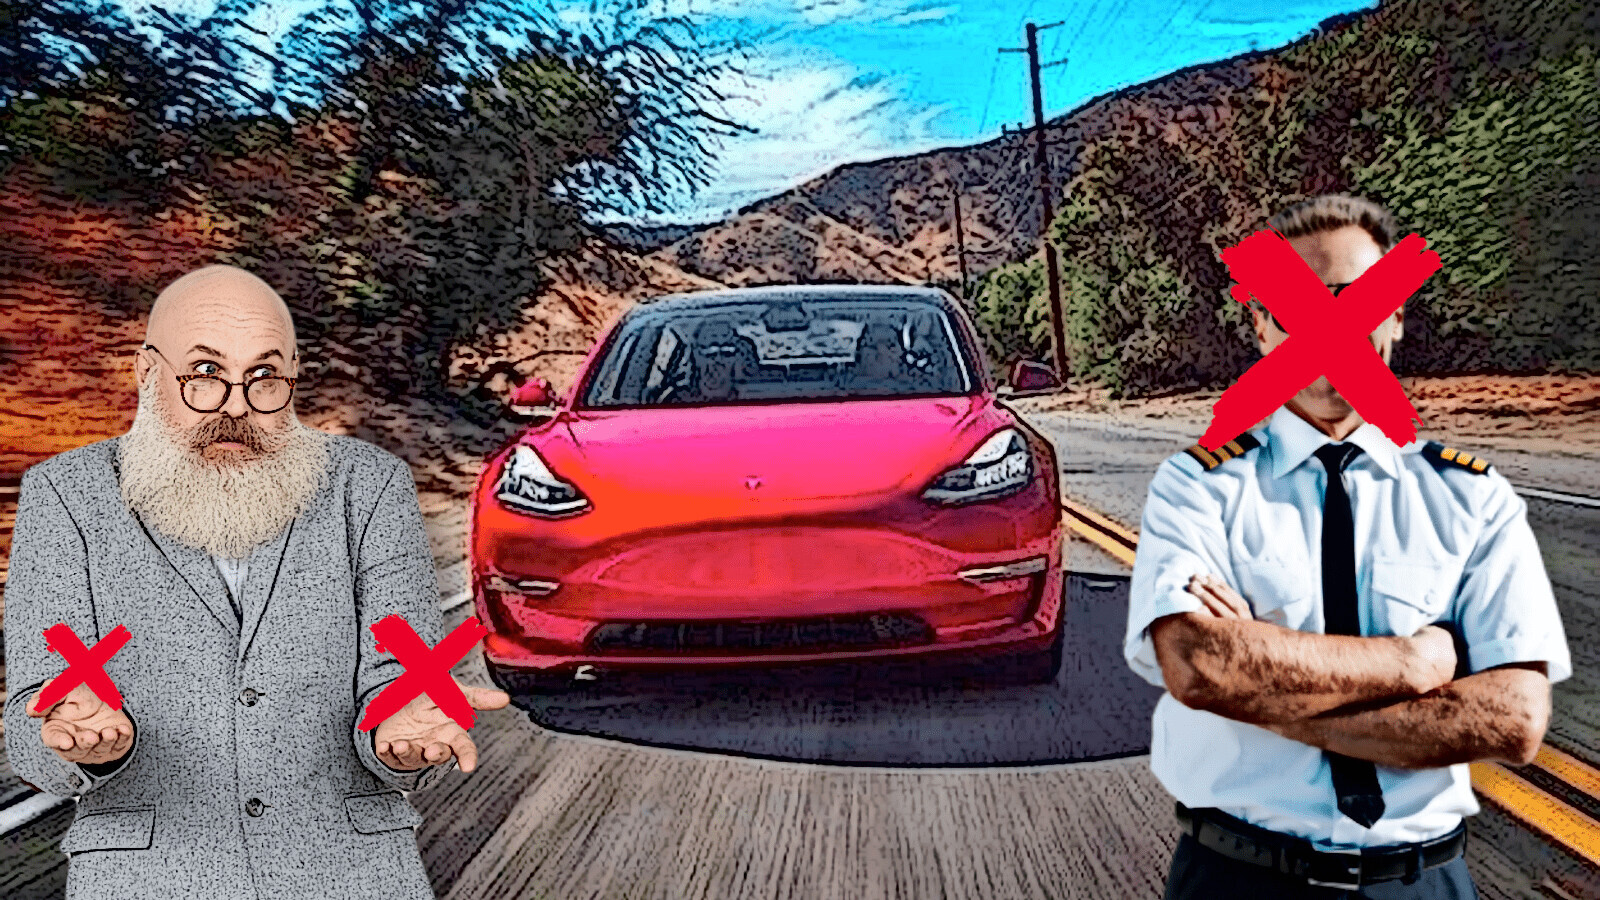 Don’t get your hopes up, Tesla probably isn’t working on LiDAR for Autopilot